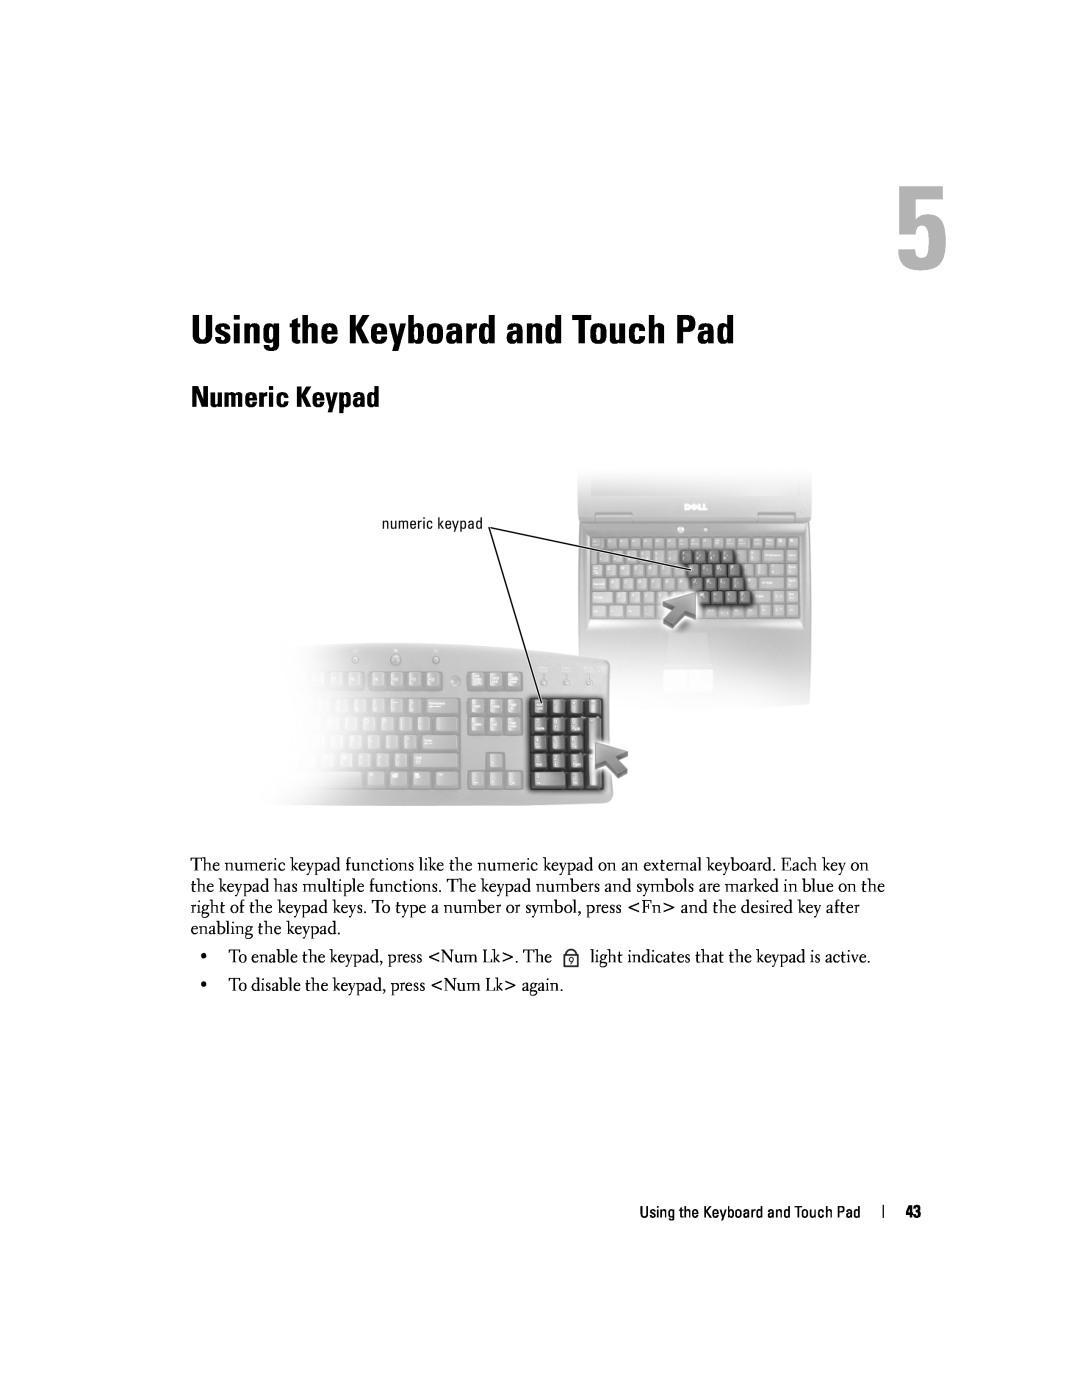 Dell 9300 owner manual Using the Keyboard and Touch Pad, Numeric Keypad 